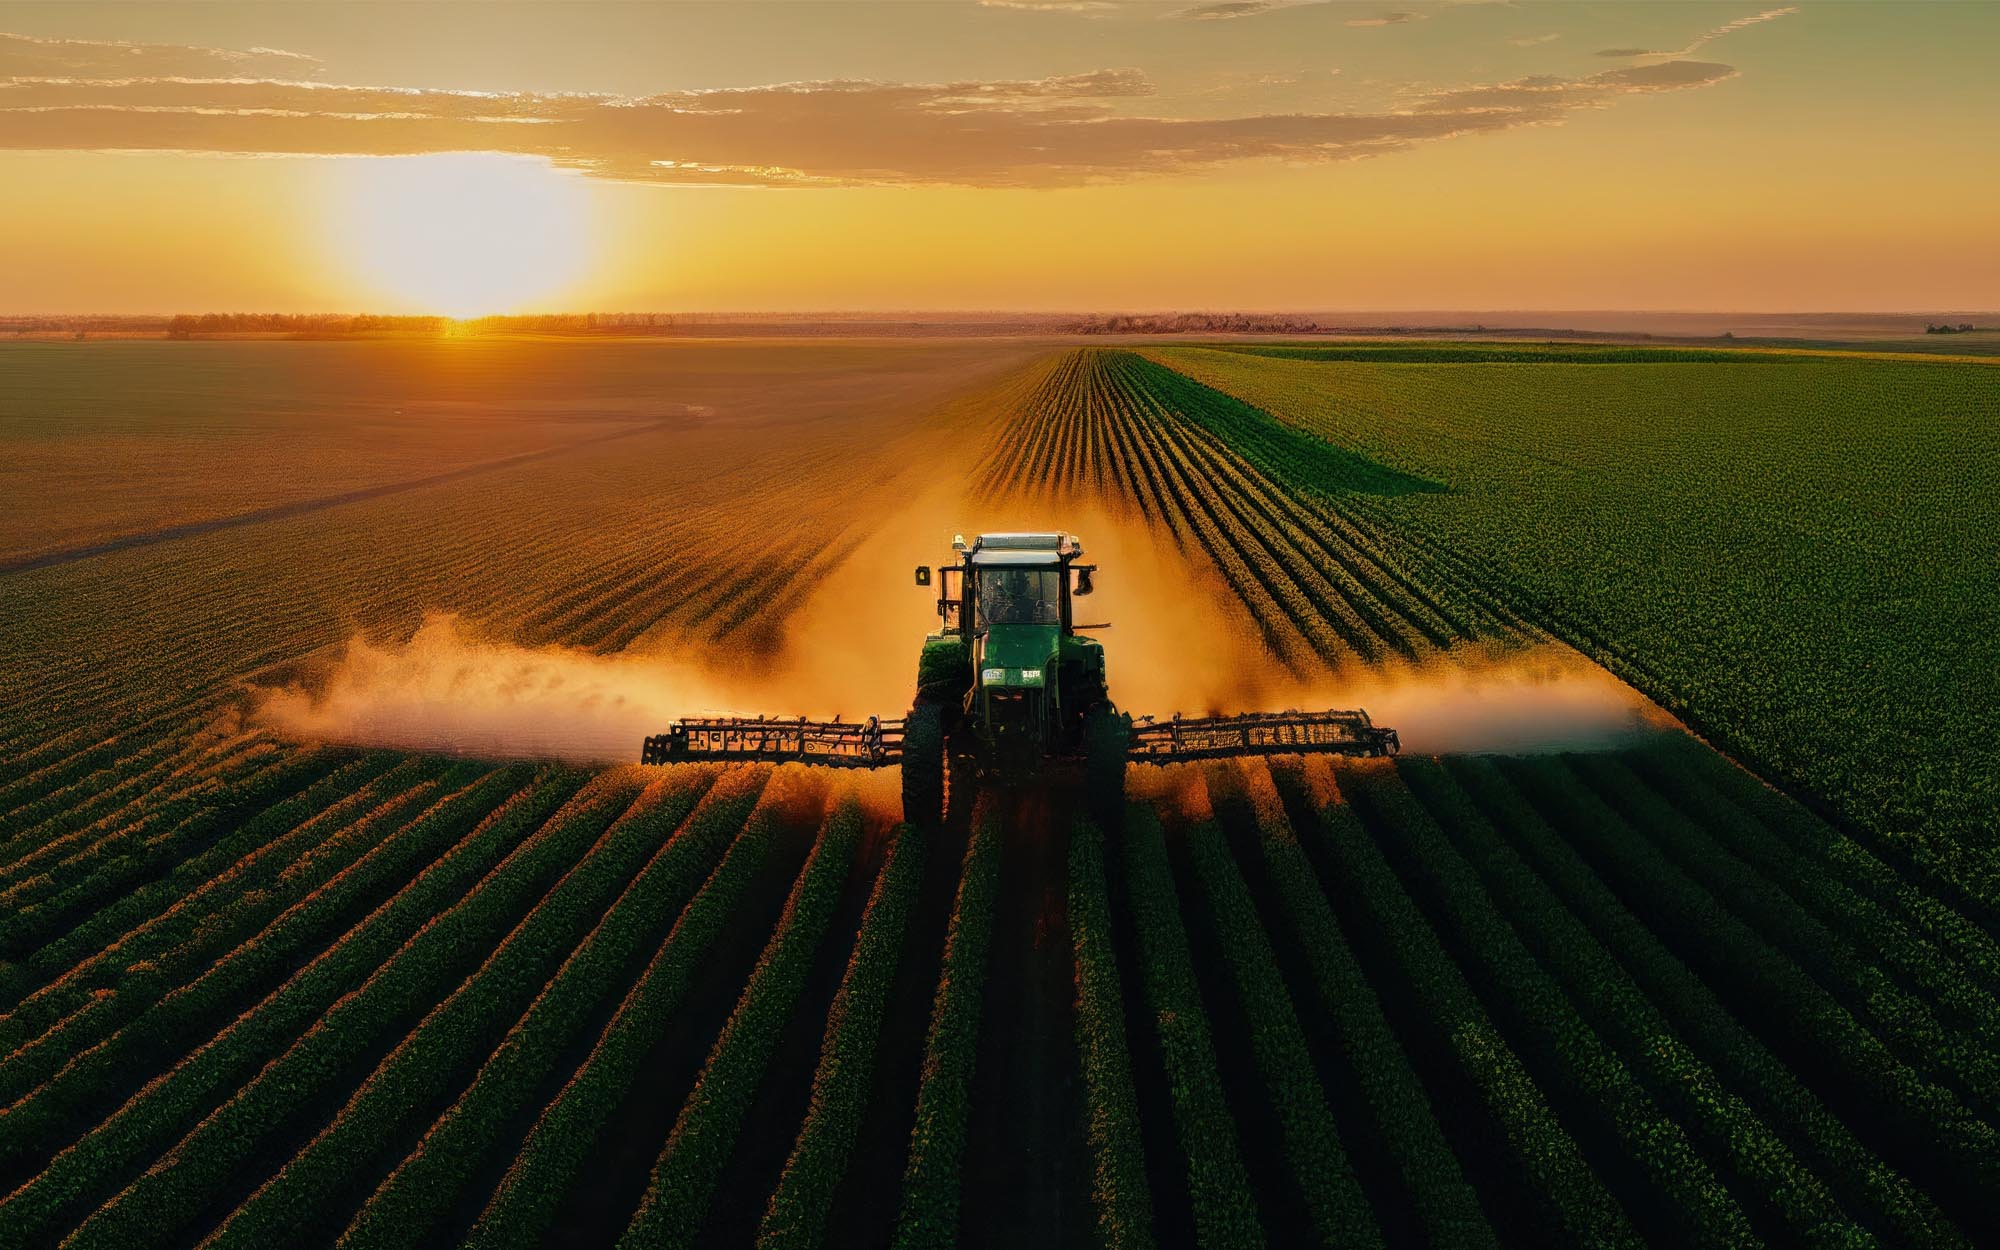 A tractor sprays an agricultural field with fertilizer on a sunset evening